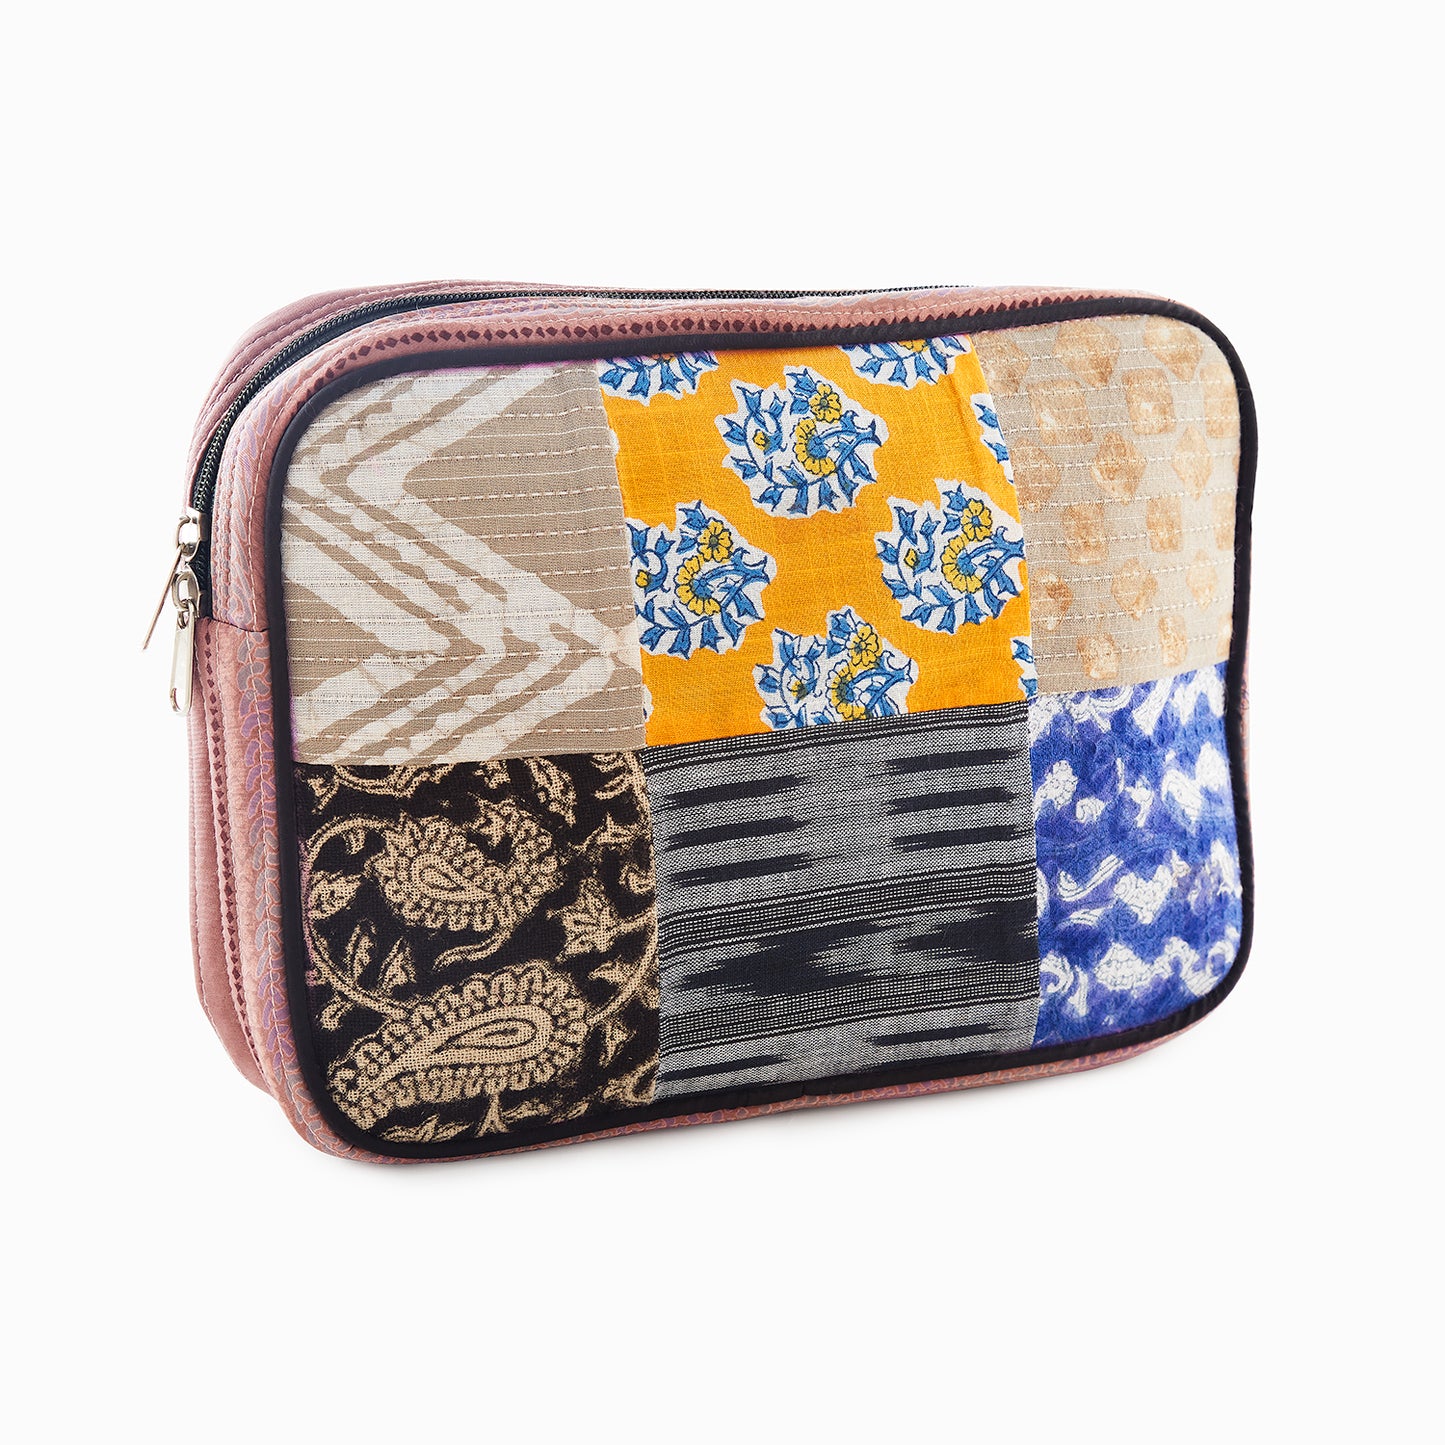 iPad Tablet Case made of Waste Fabric - Avacayam Recycle Products